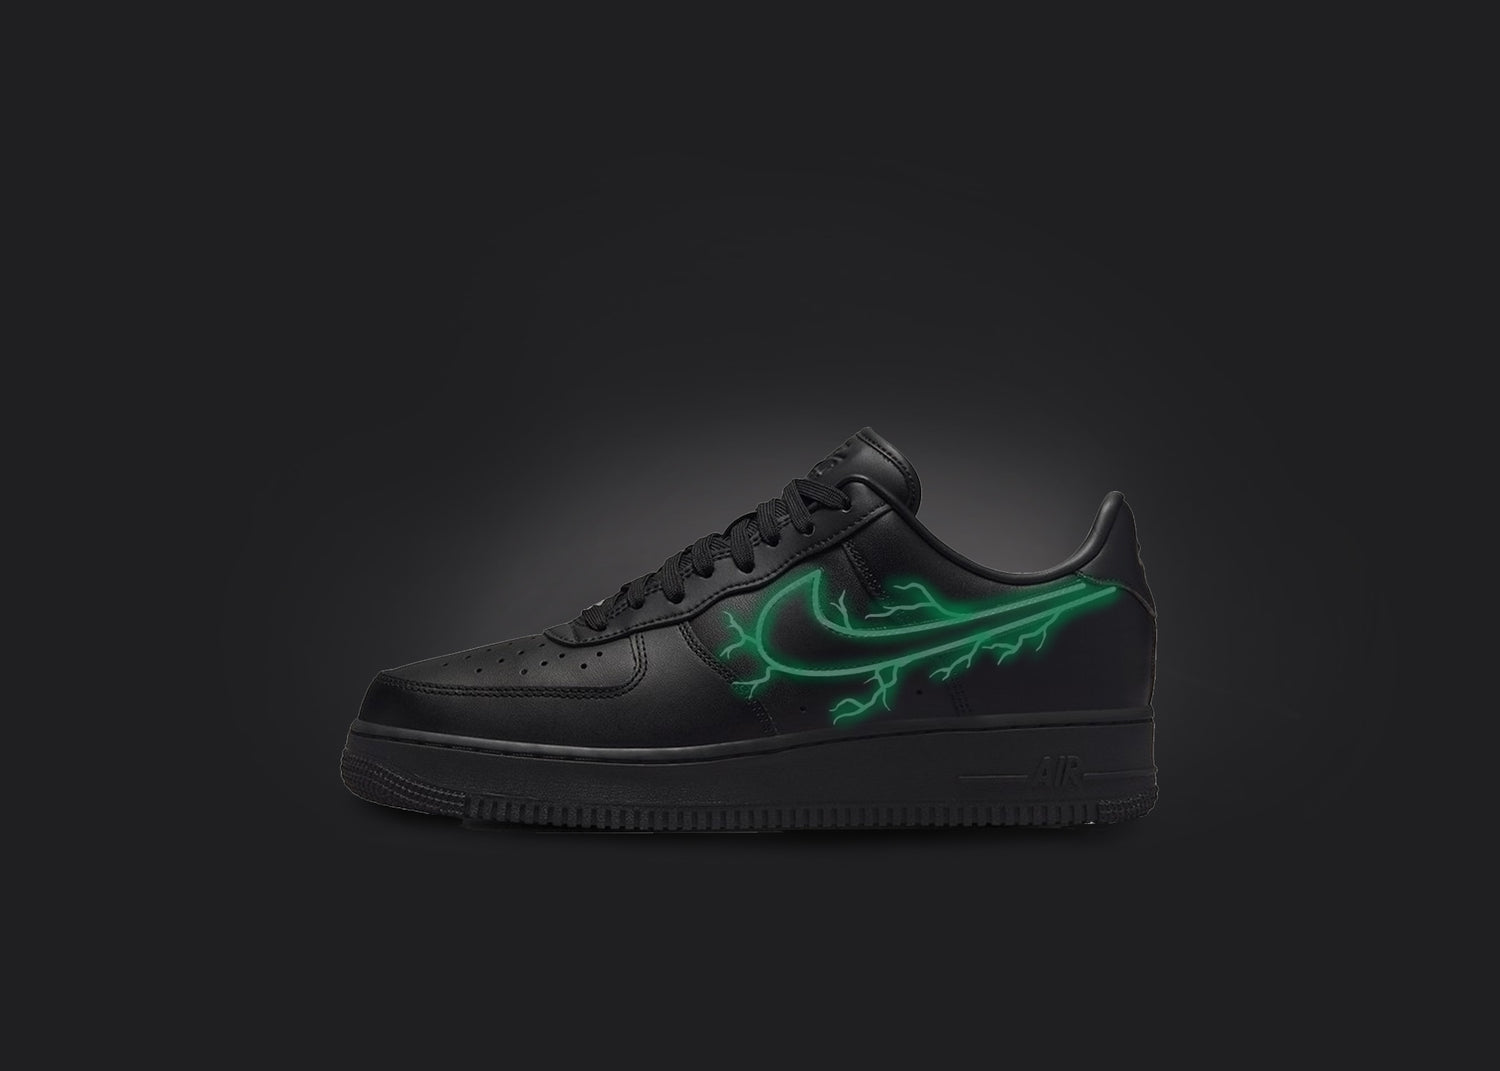 The image is featuring a custom black Air force 1 sneaker on a blank black background. The black nike sneaker has a custom green lightning design on the nike logo. 